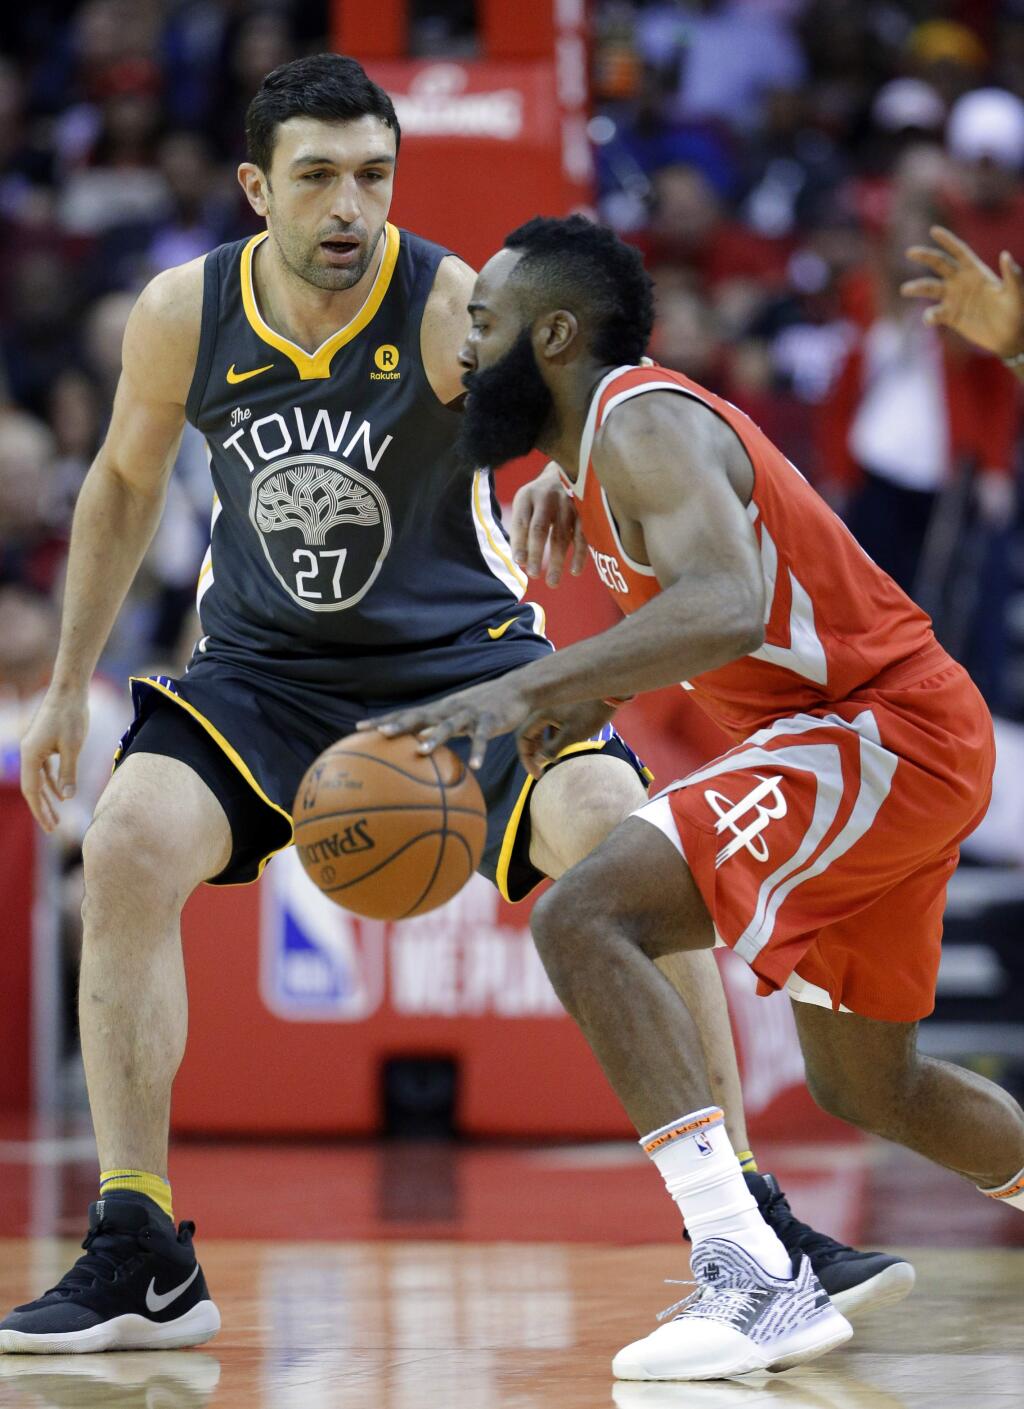 Houston Rockets guard James Harden (13) drives around Golden State Warriors center Zaza Pachulia (27) during the first half of an NBA basketball game Saturday, Jan. 20, 2018, in Houston. (AP Photo/Michael Wyke)